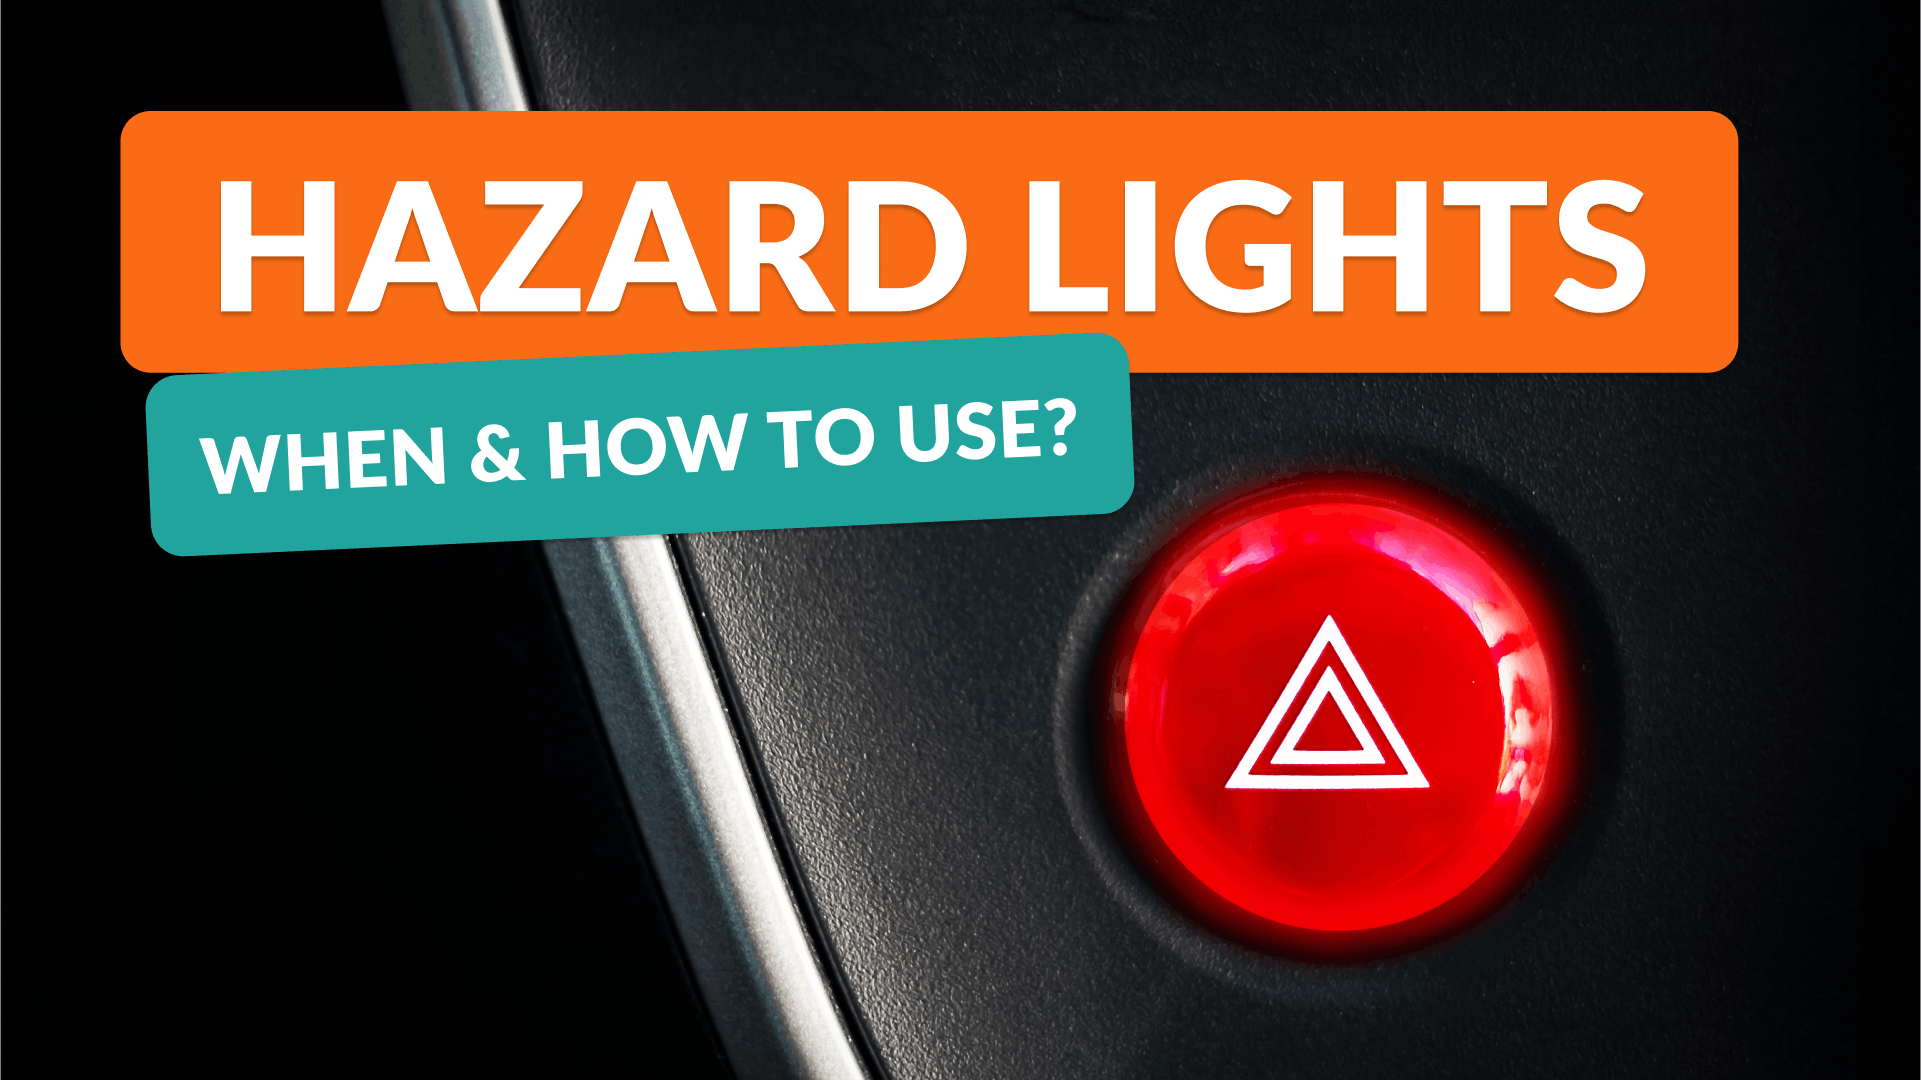 What are Hazard Lights and When Should You Use Them?